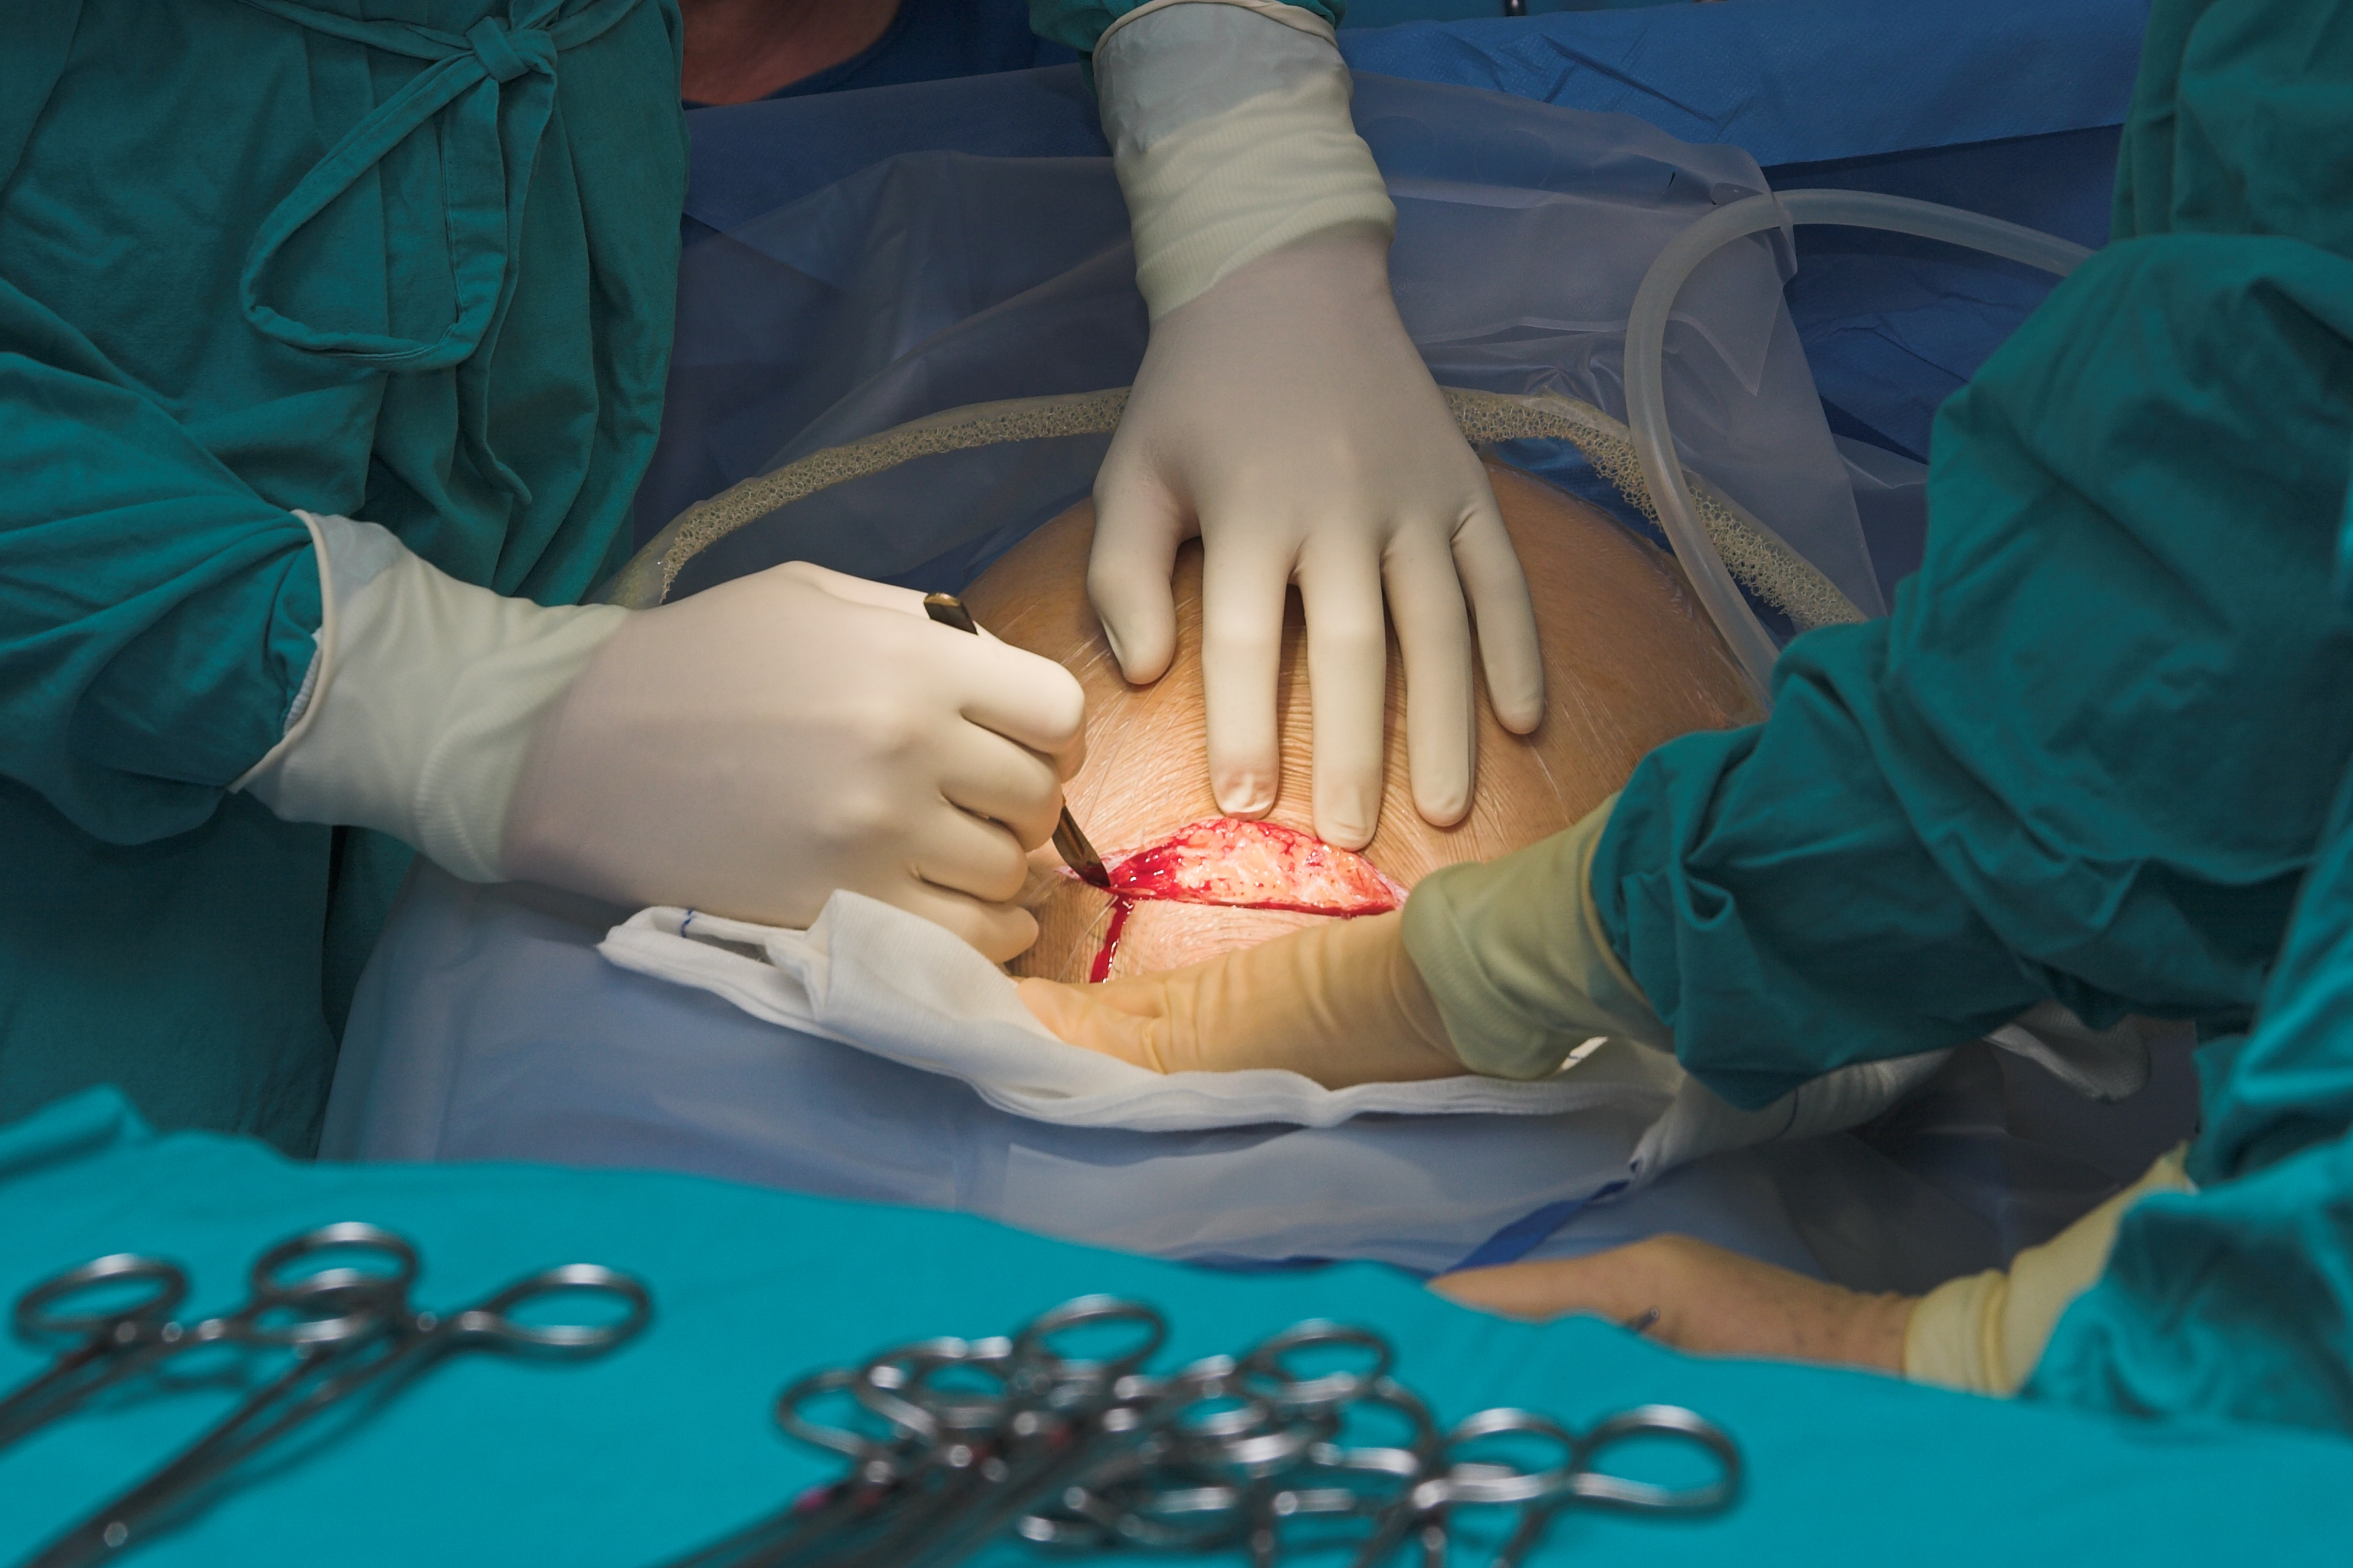 How Many Stitches Are Required for a C-Section (Cesarean Birth)?